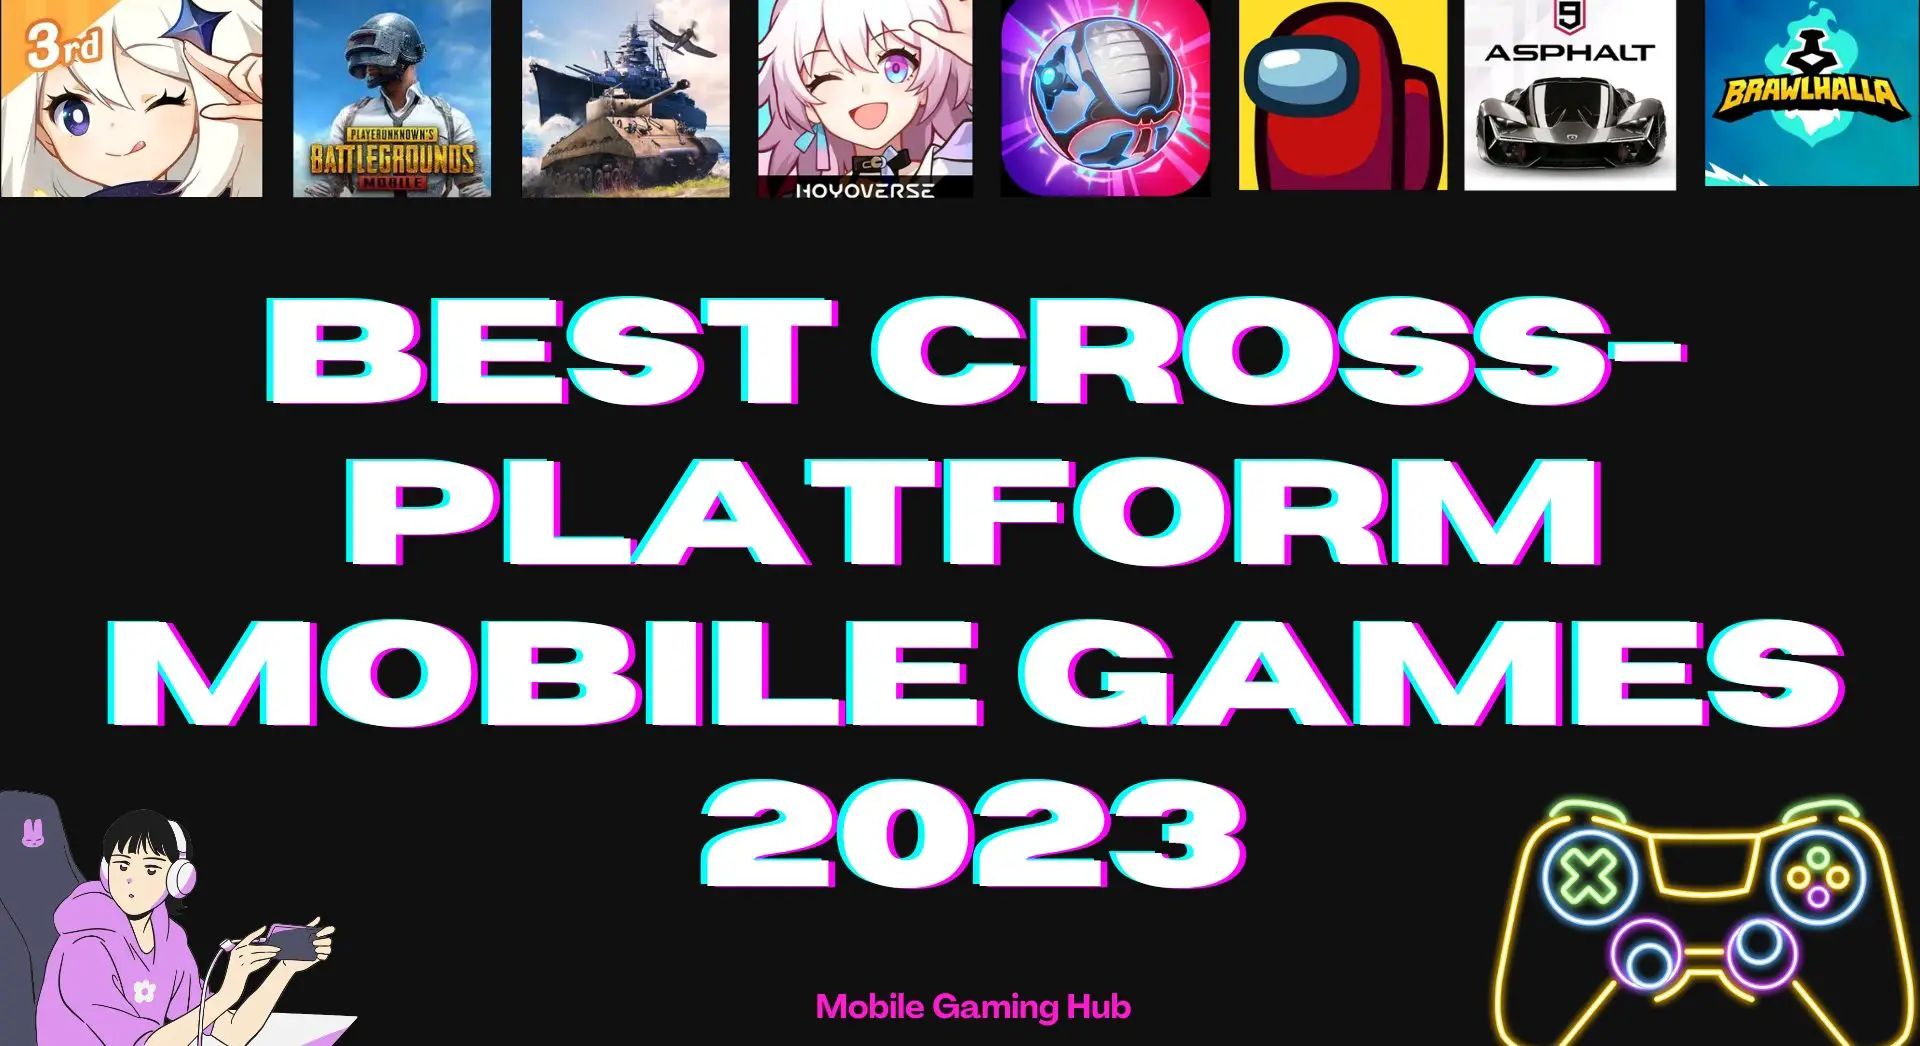 The best cross-platform mobile games to try in 2023